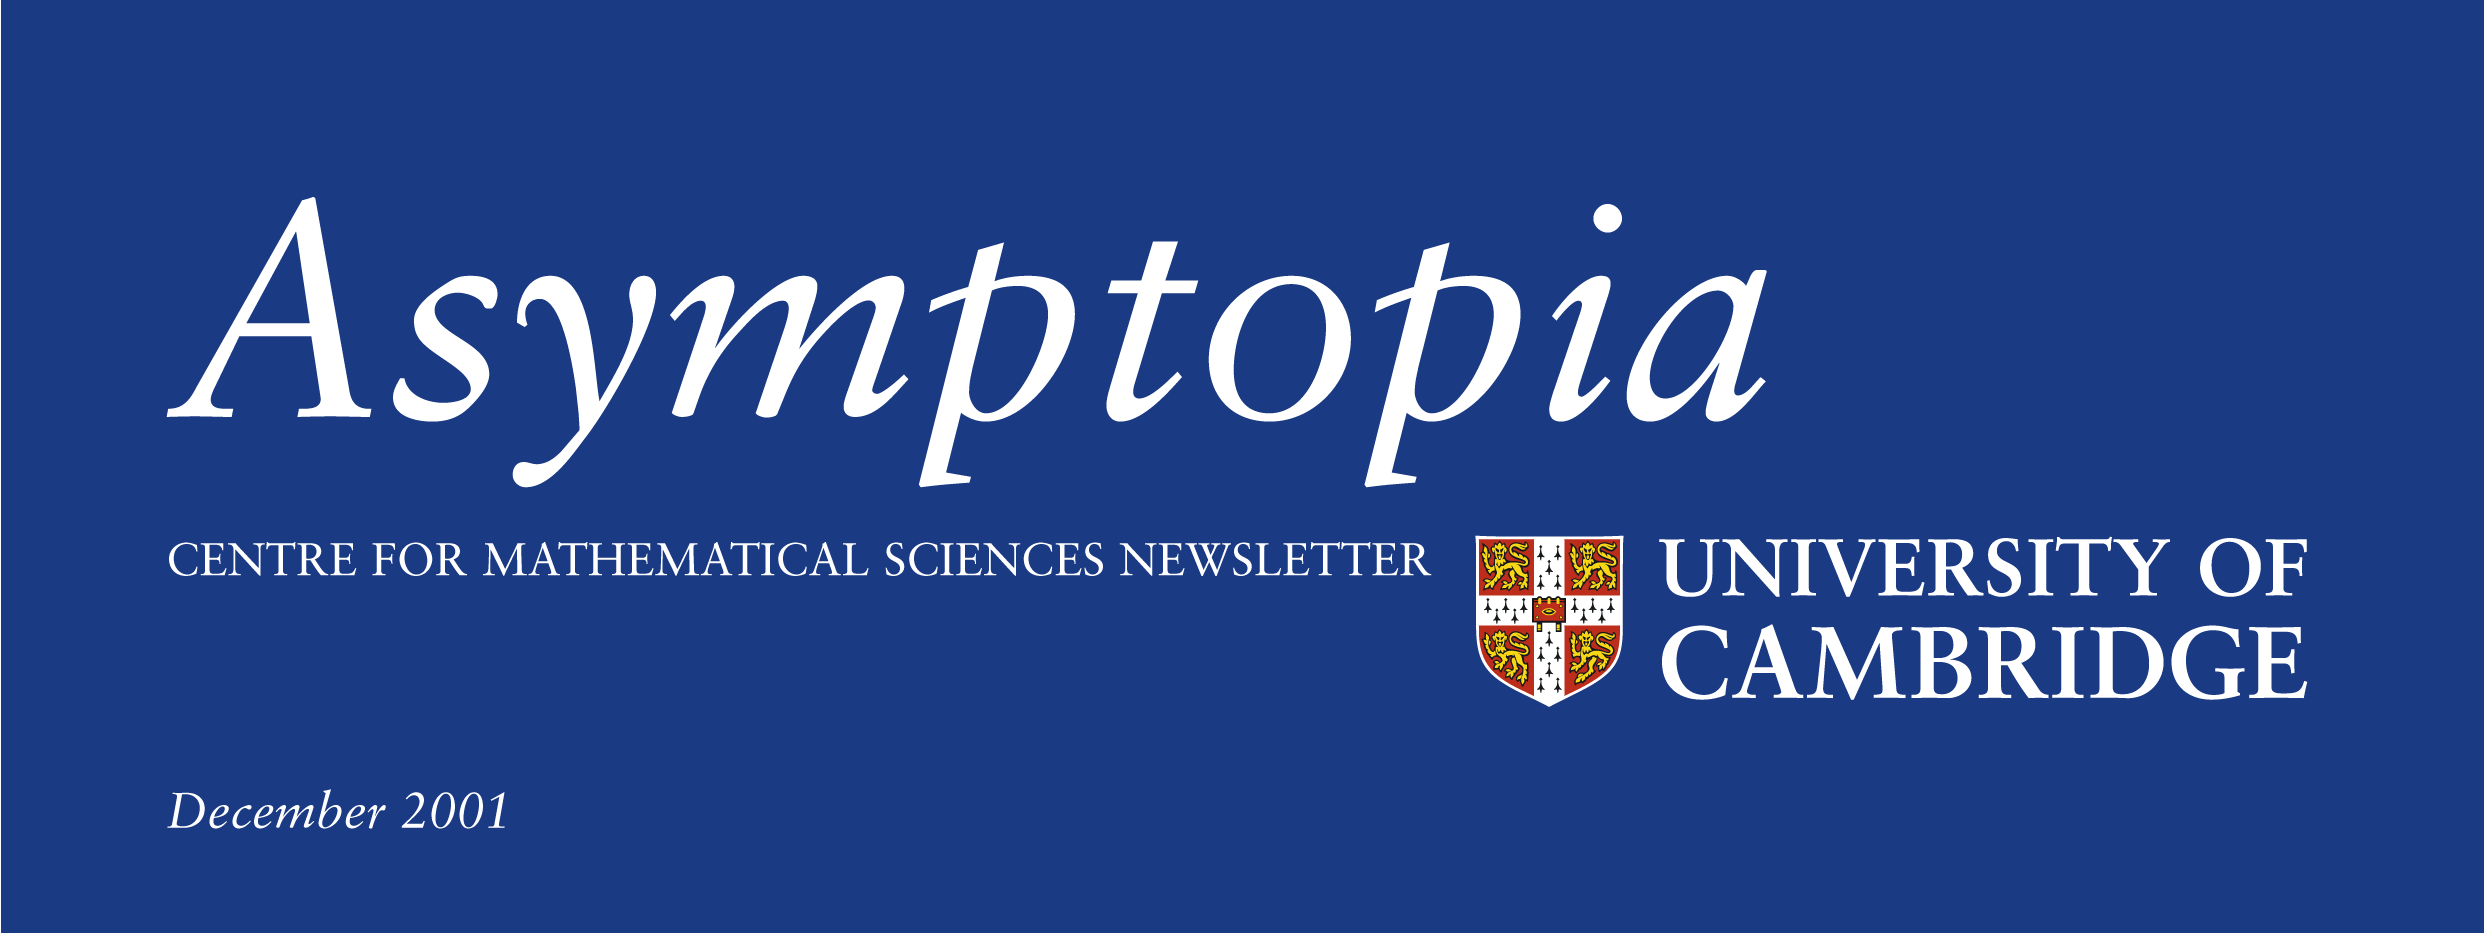 Asymptopia - Centre for Mathematical Sciences Newsletter. December 2001